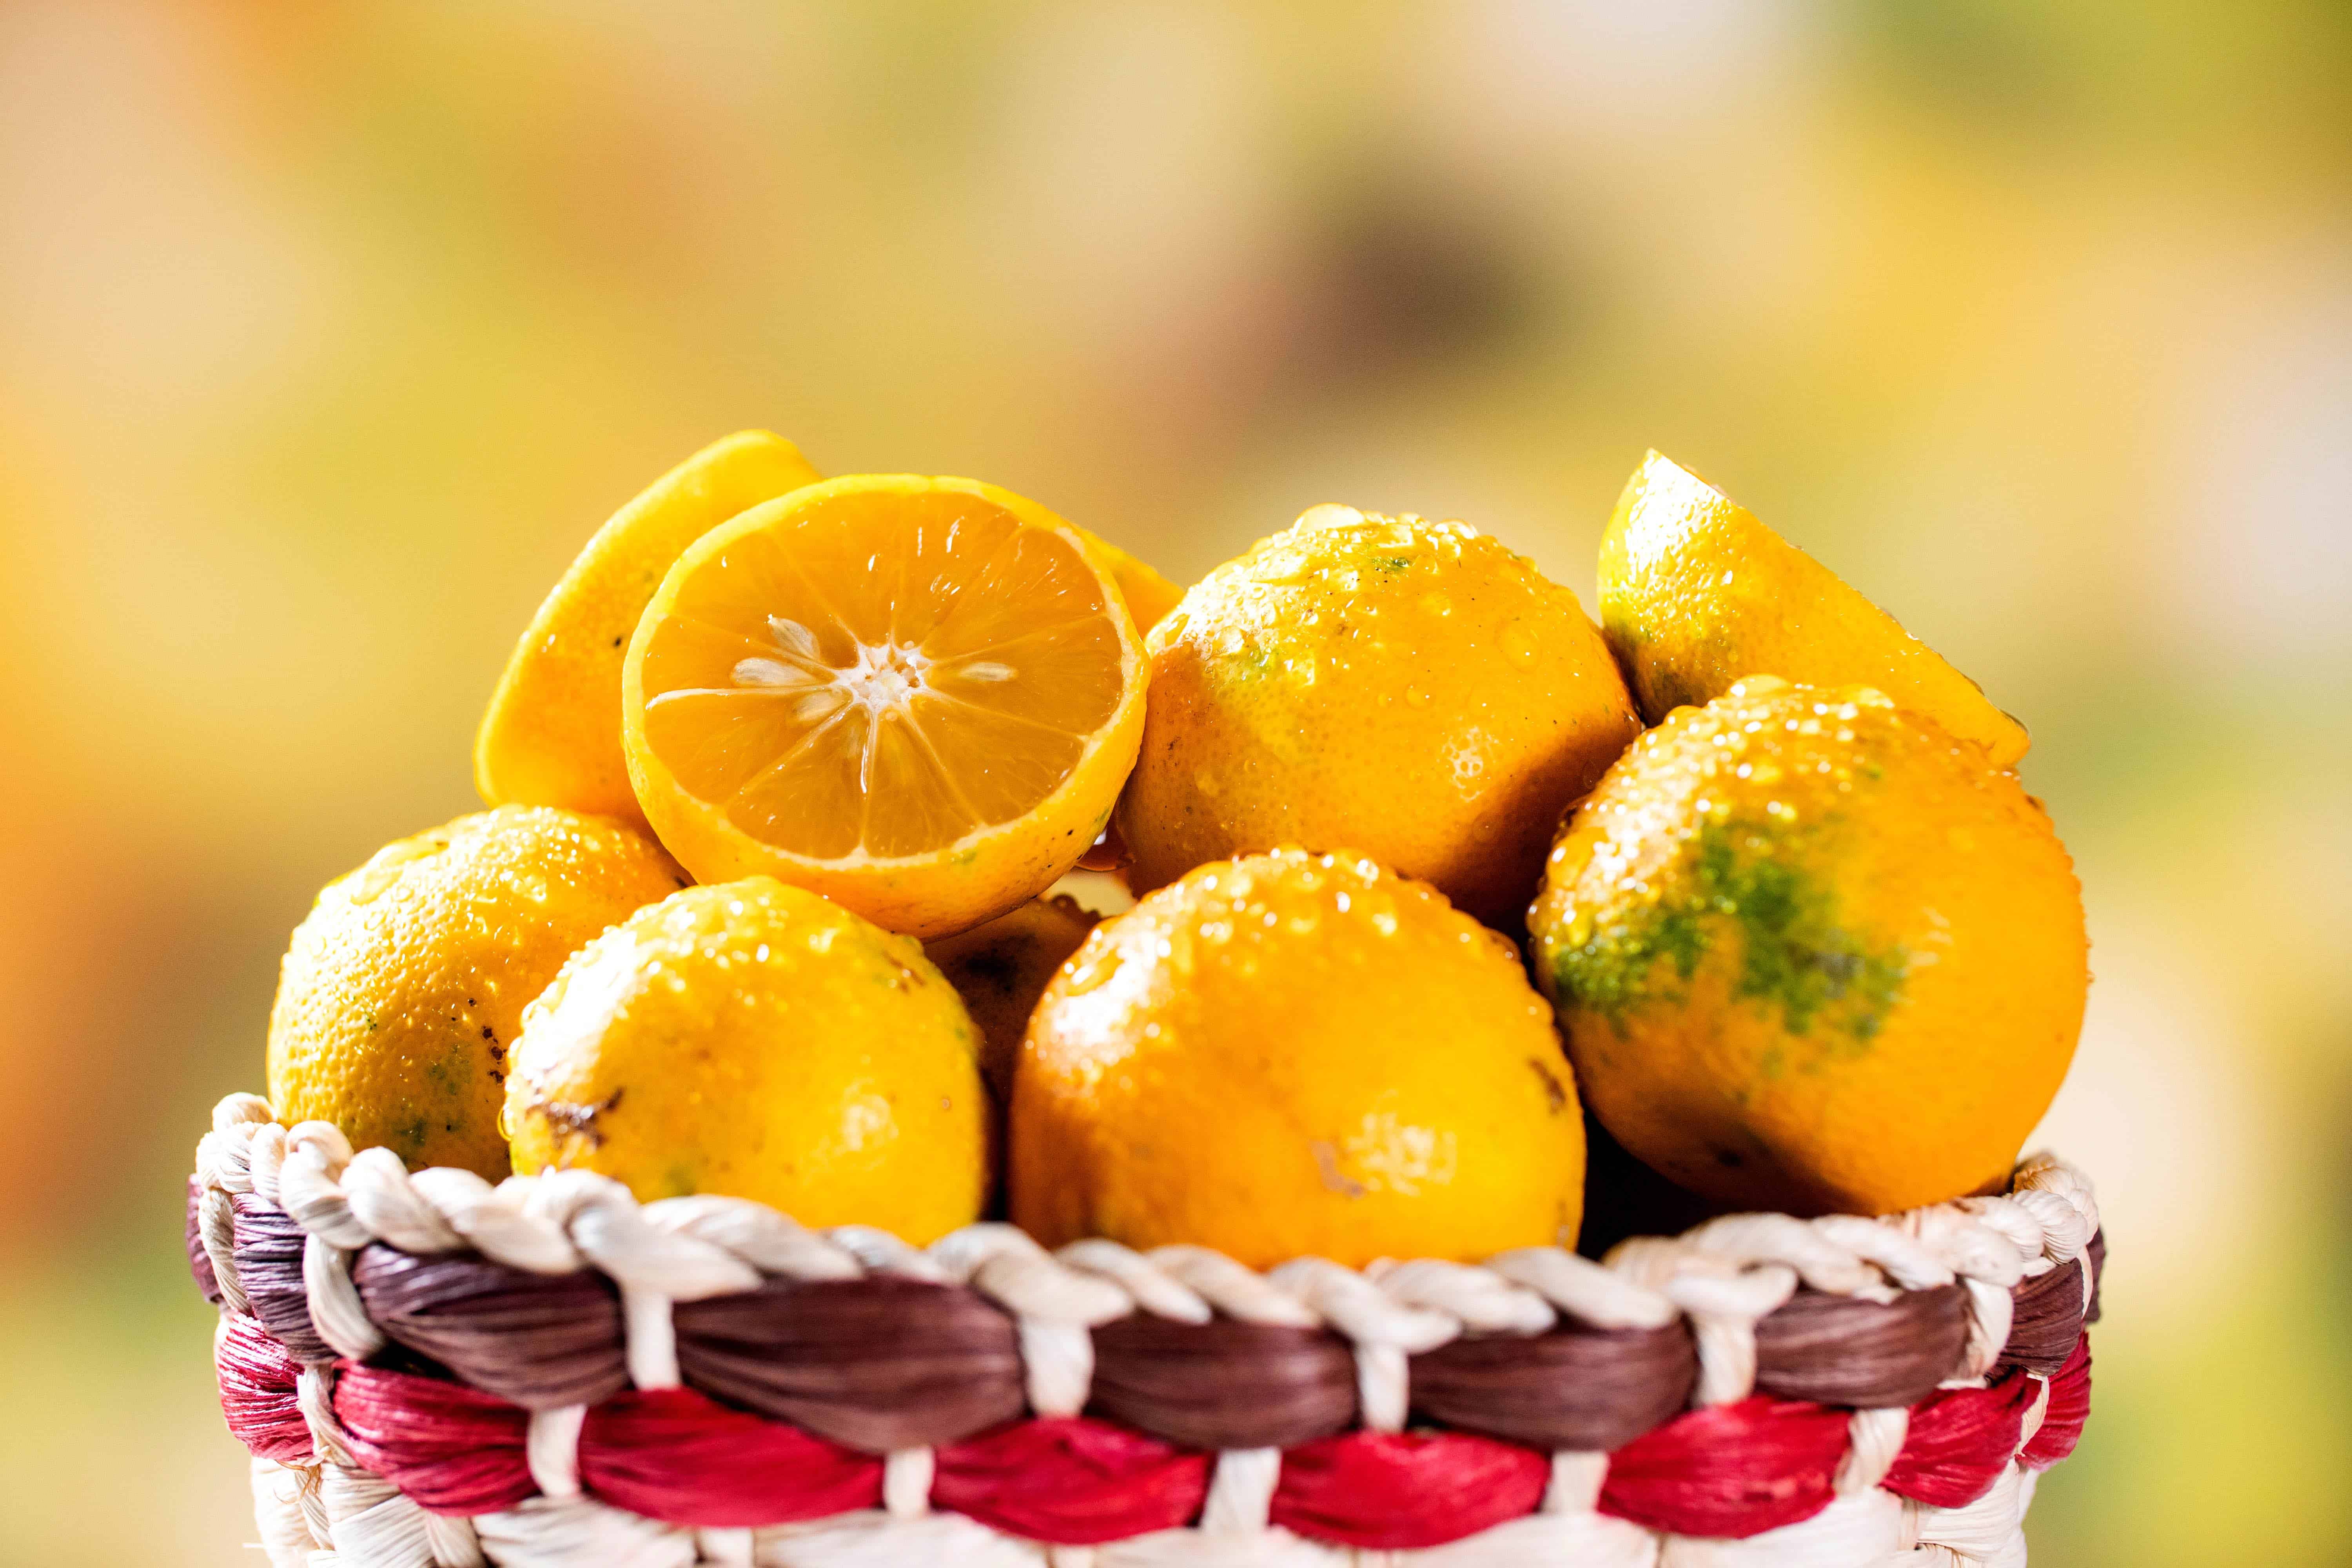 Citrus Fruits List: 30 Types of Citrus You Didn't Know - Facts.net